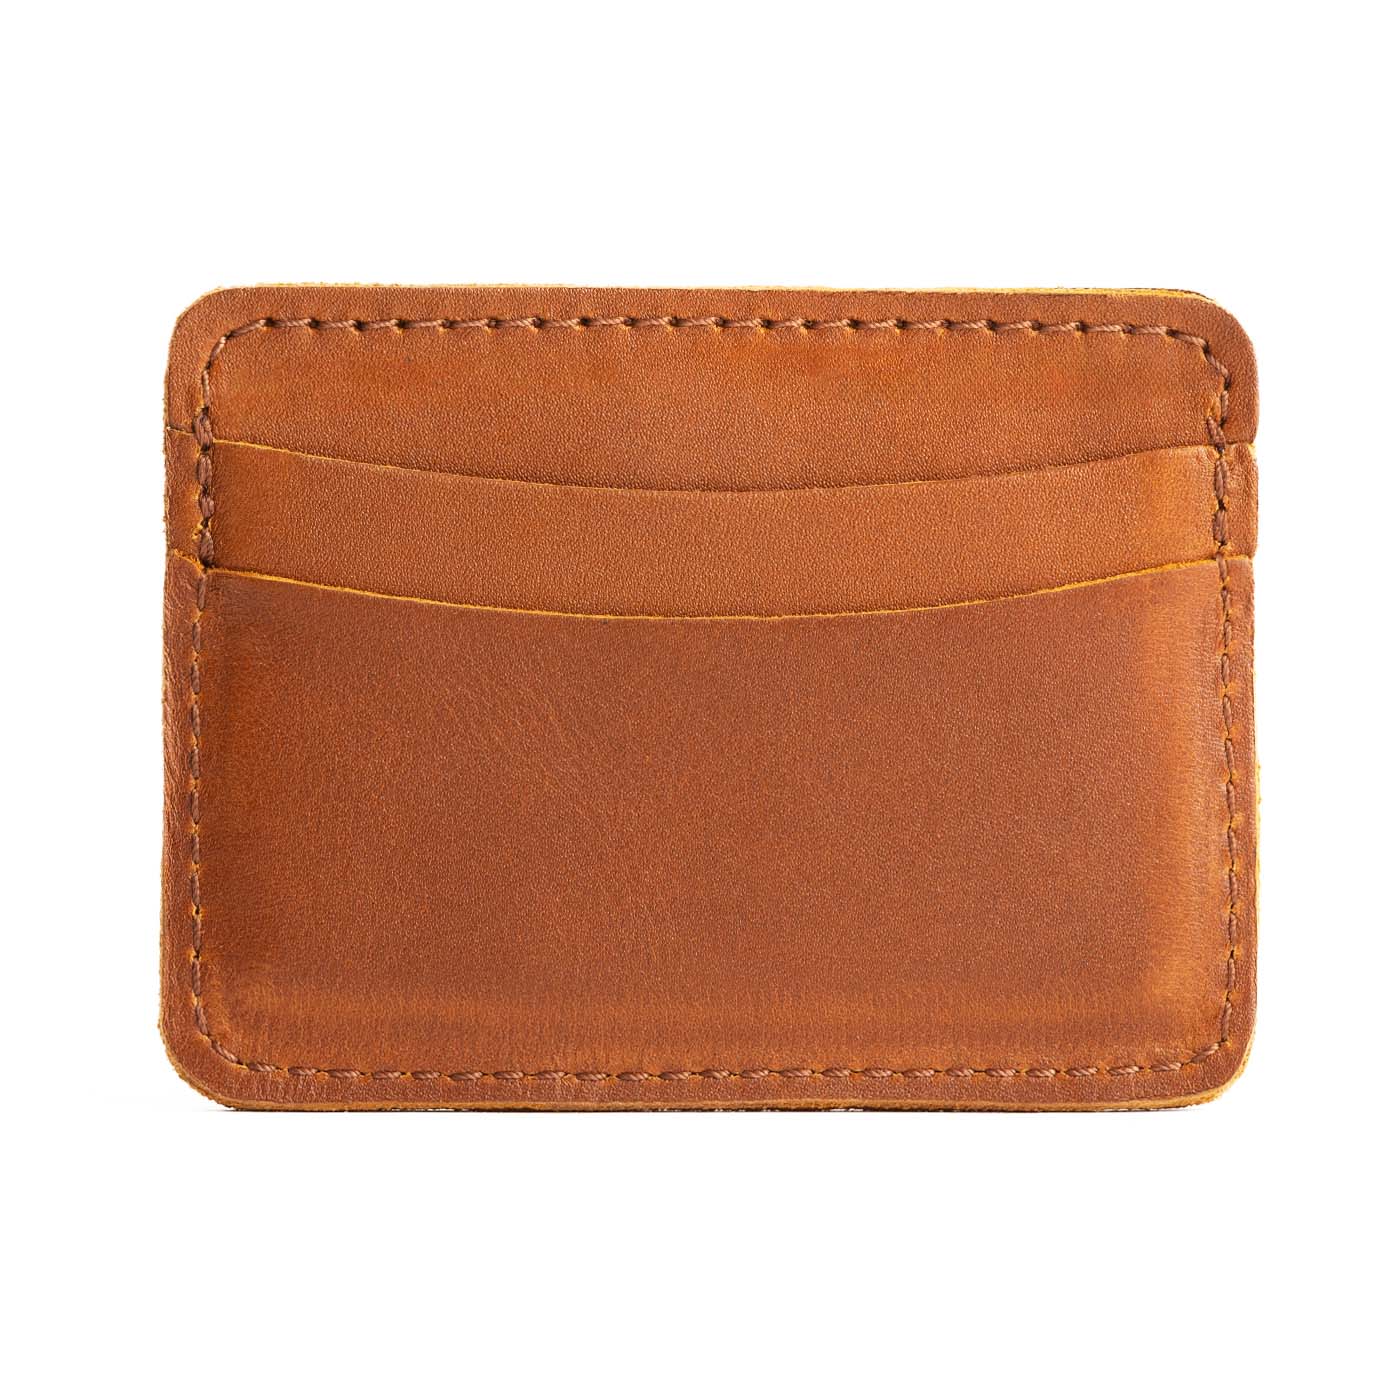 Honey | Minimalist leather wallet with card slots